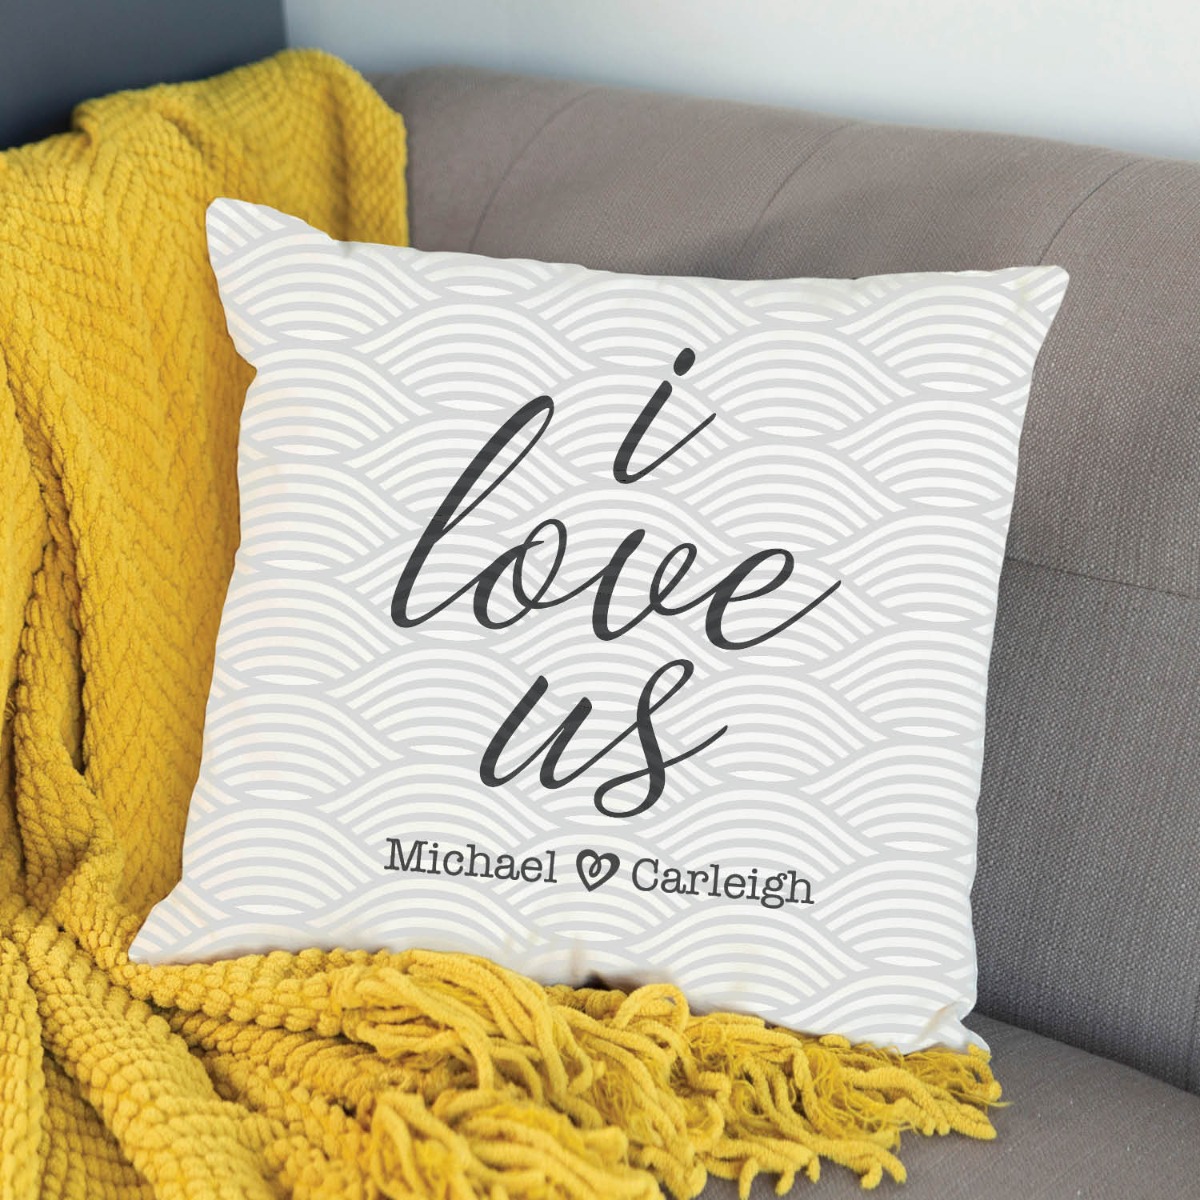 I Love Us Personalized Throw Pillow